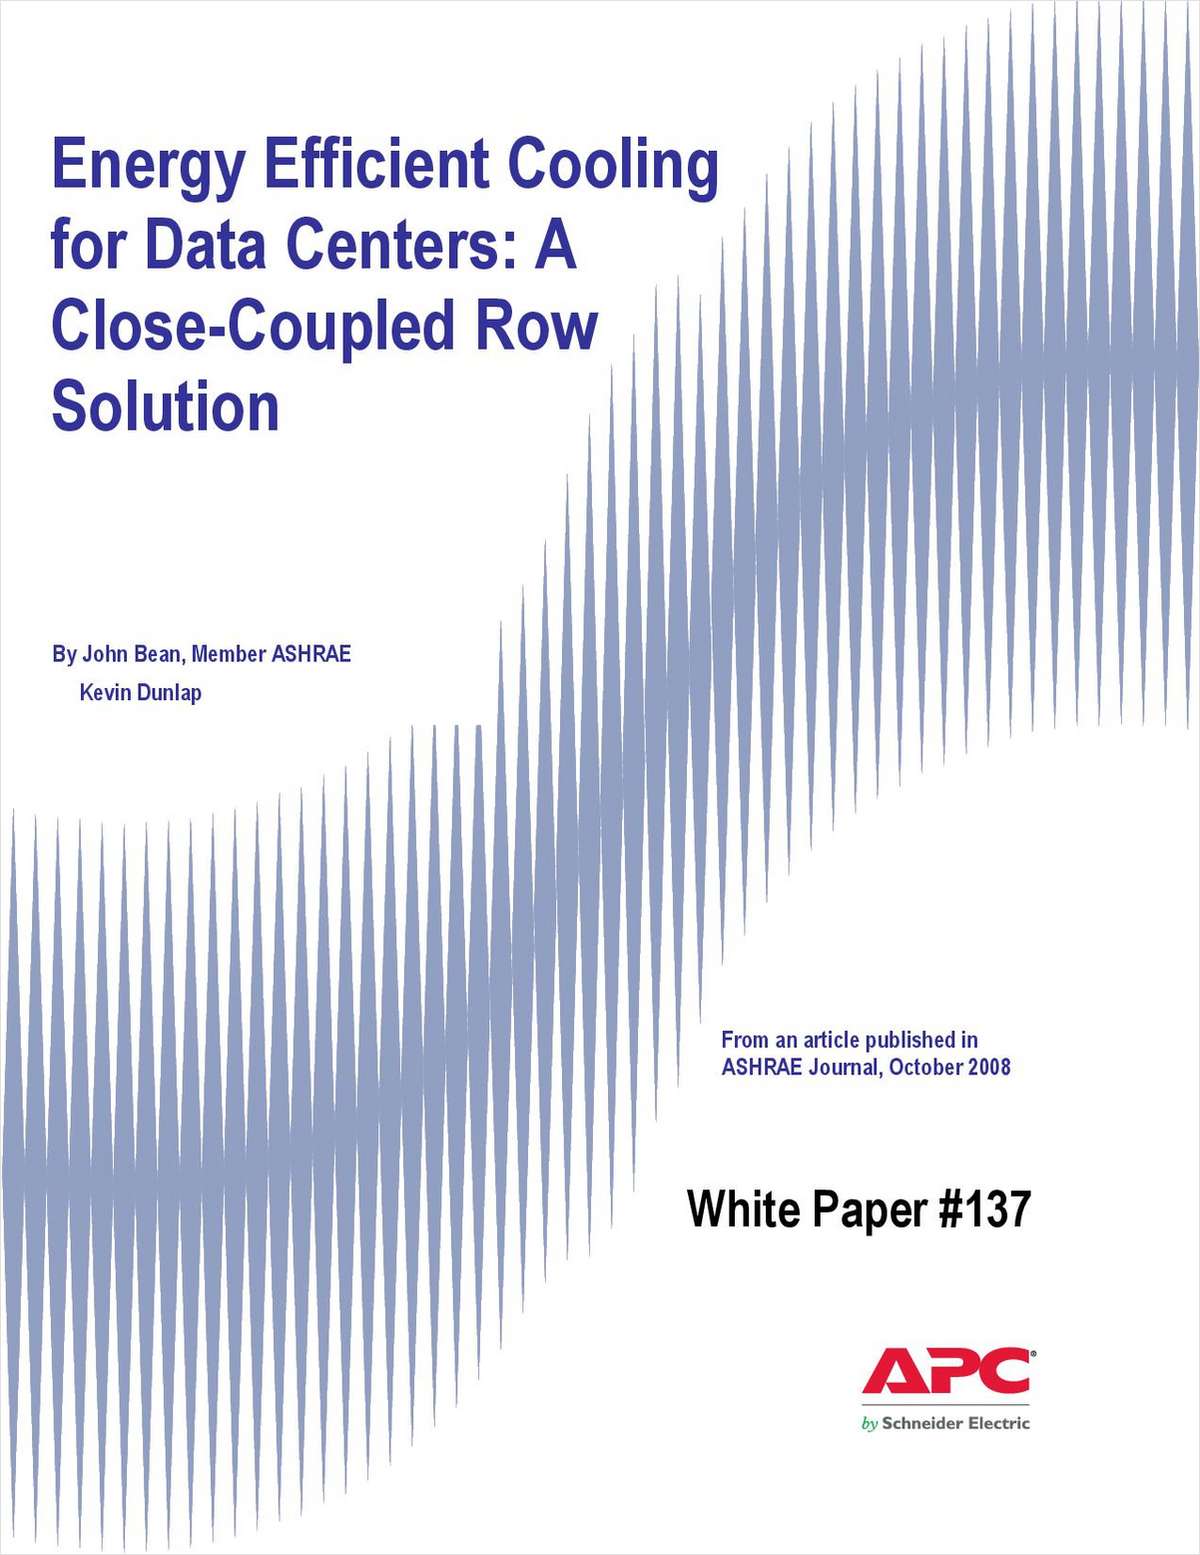 Energy Efficient Cooling for Data Centers: A Close-Coupled Row Solution